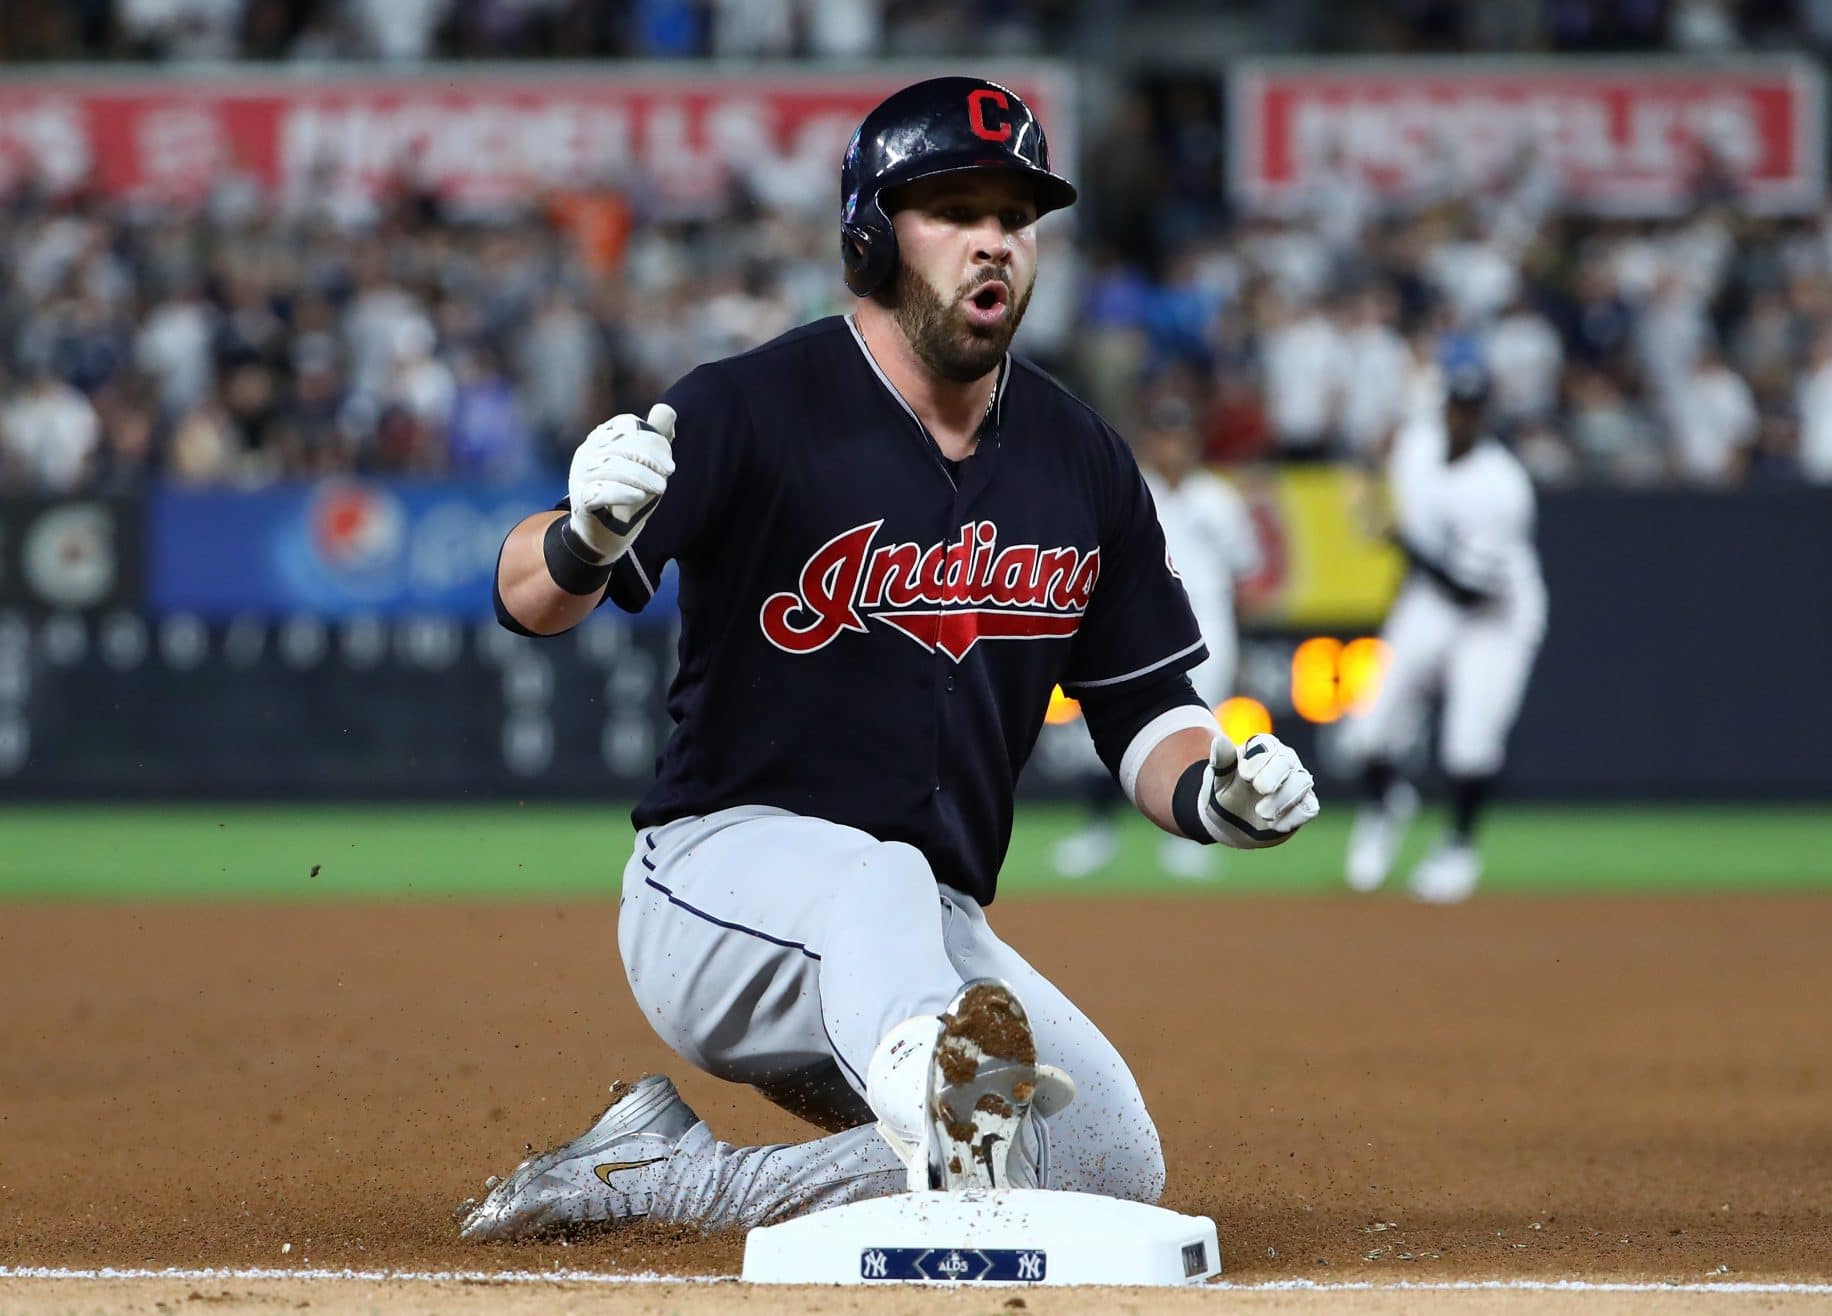 The New York Mets have no excuse not to trade for Jason Kipnis